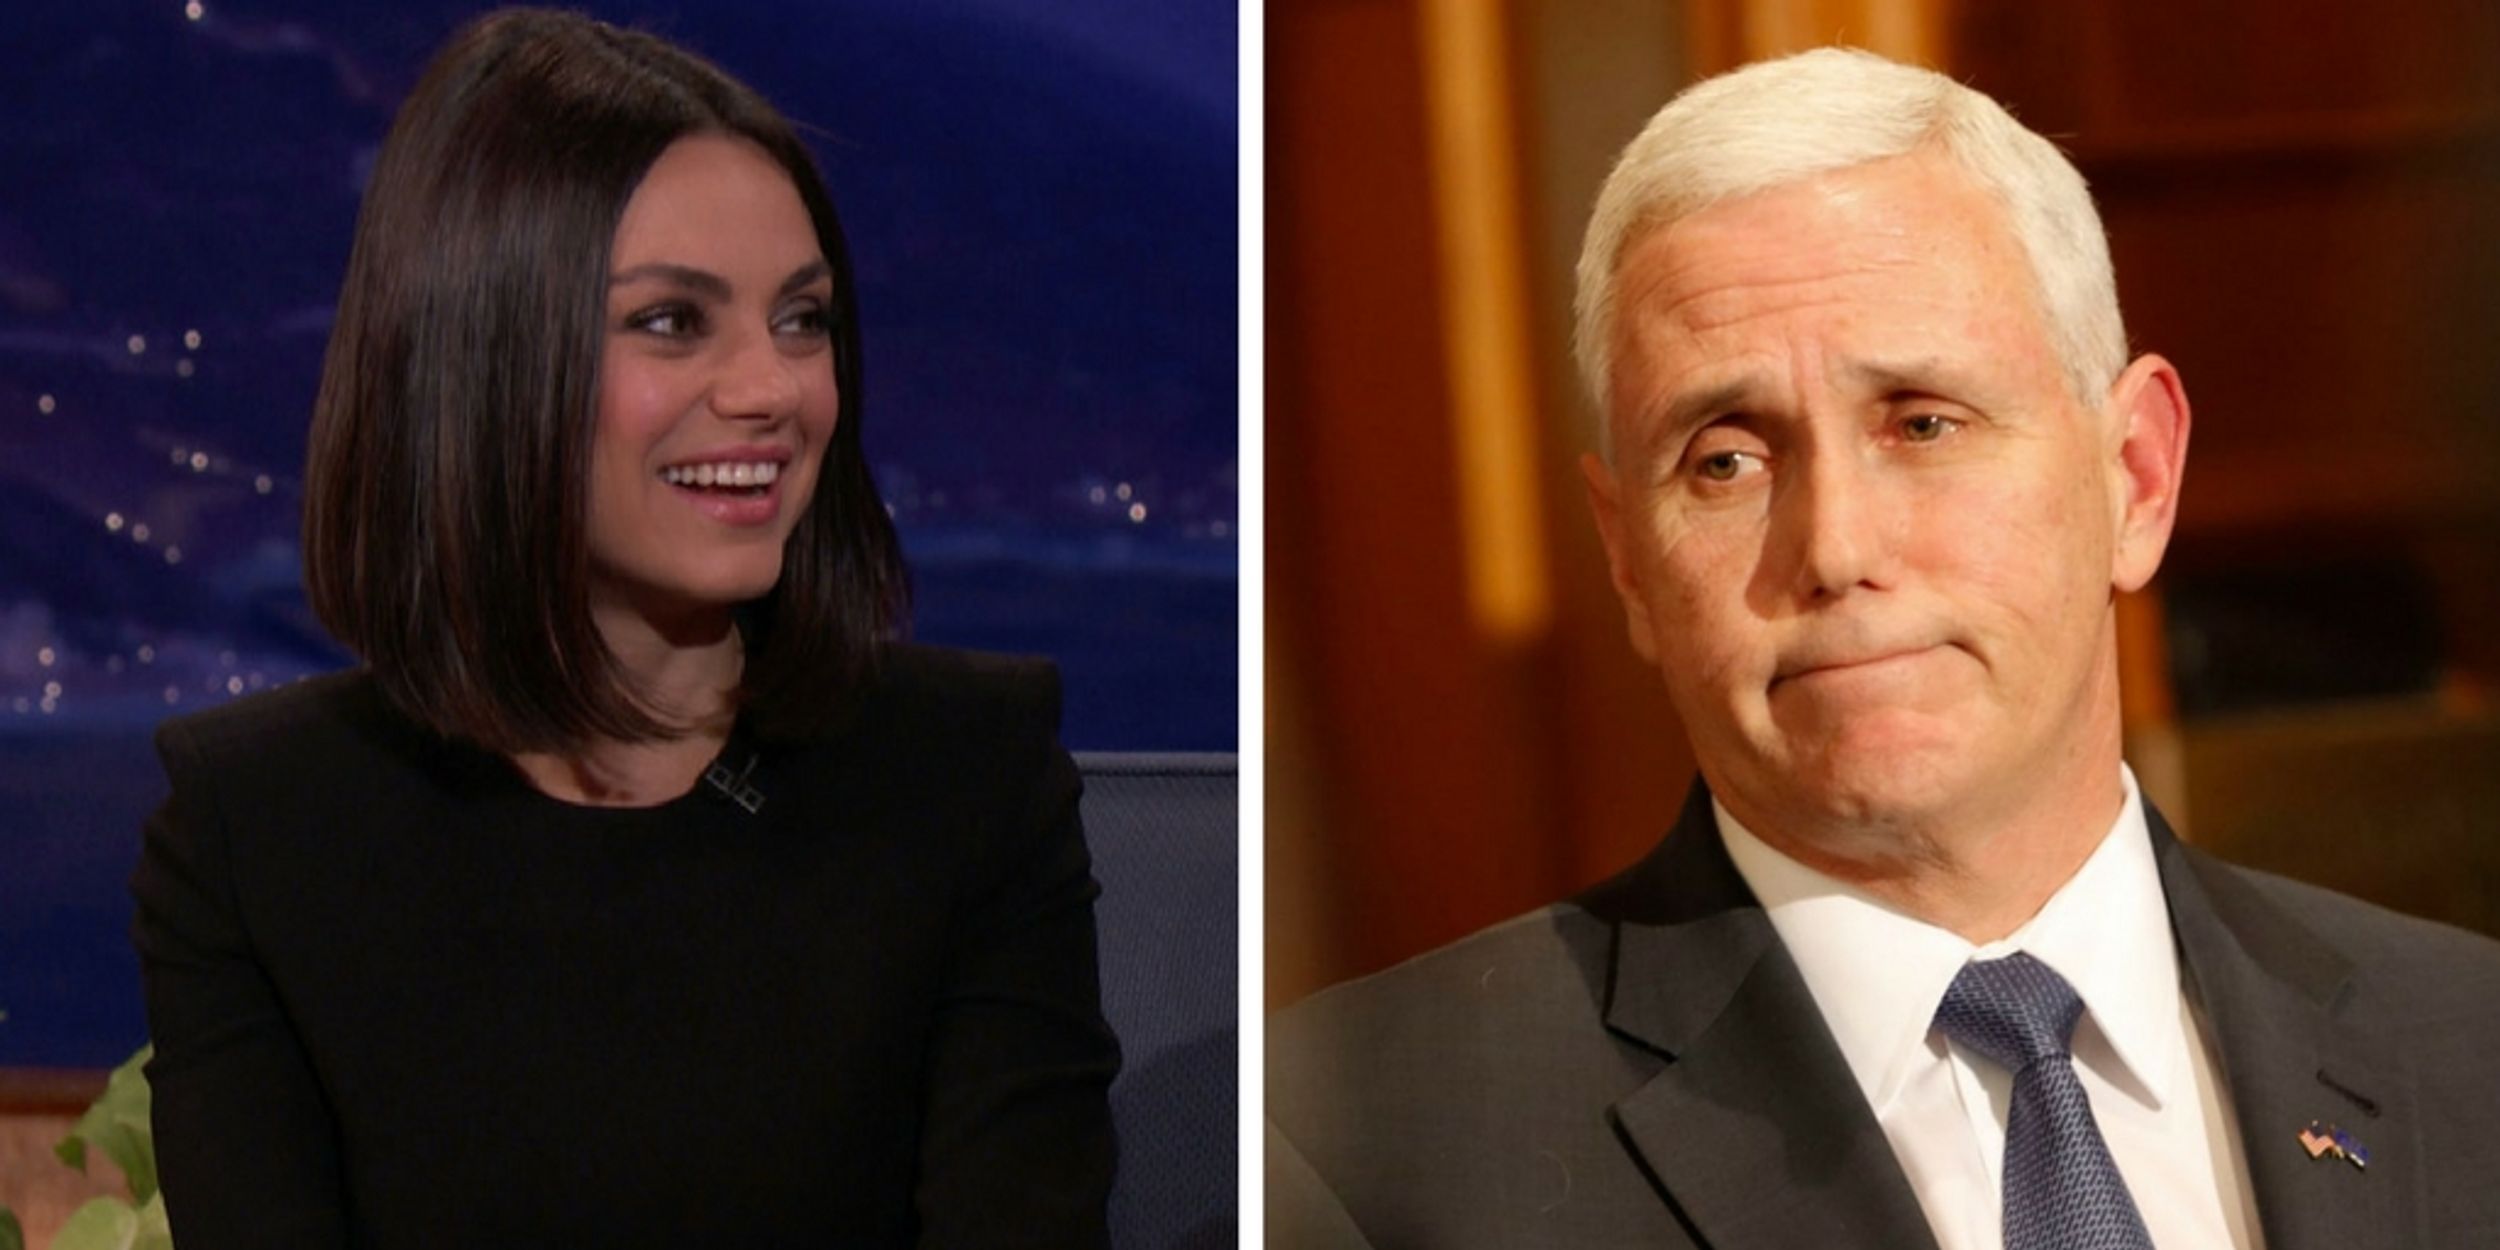 Mila Kunis Donates to Planned Parenthood for Mike Pence